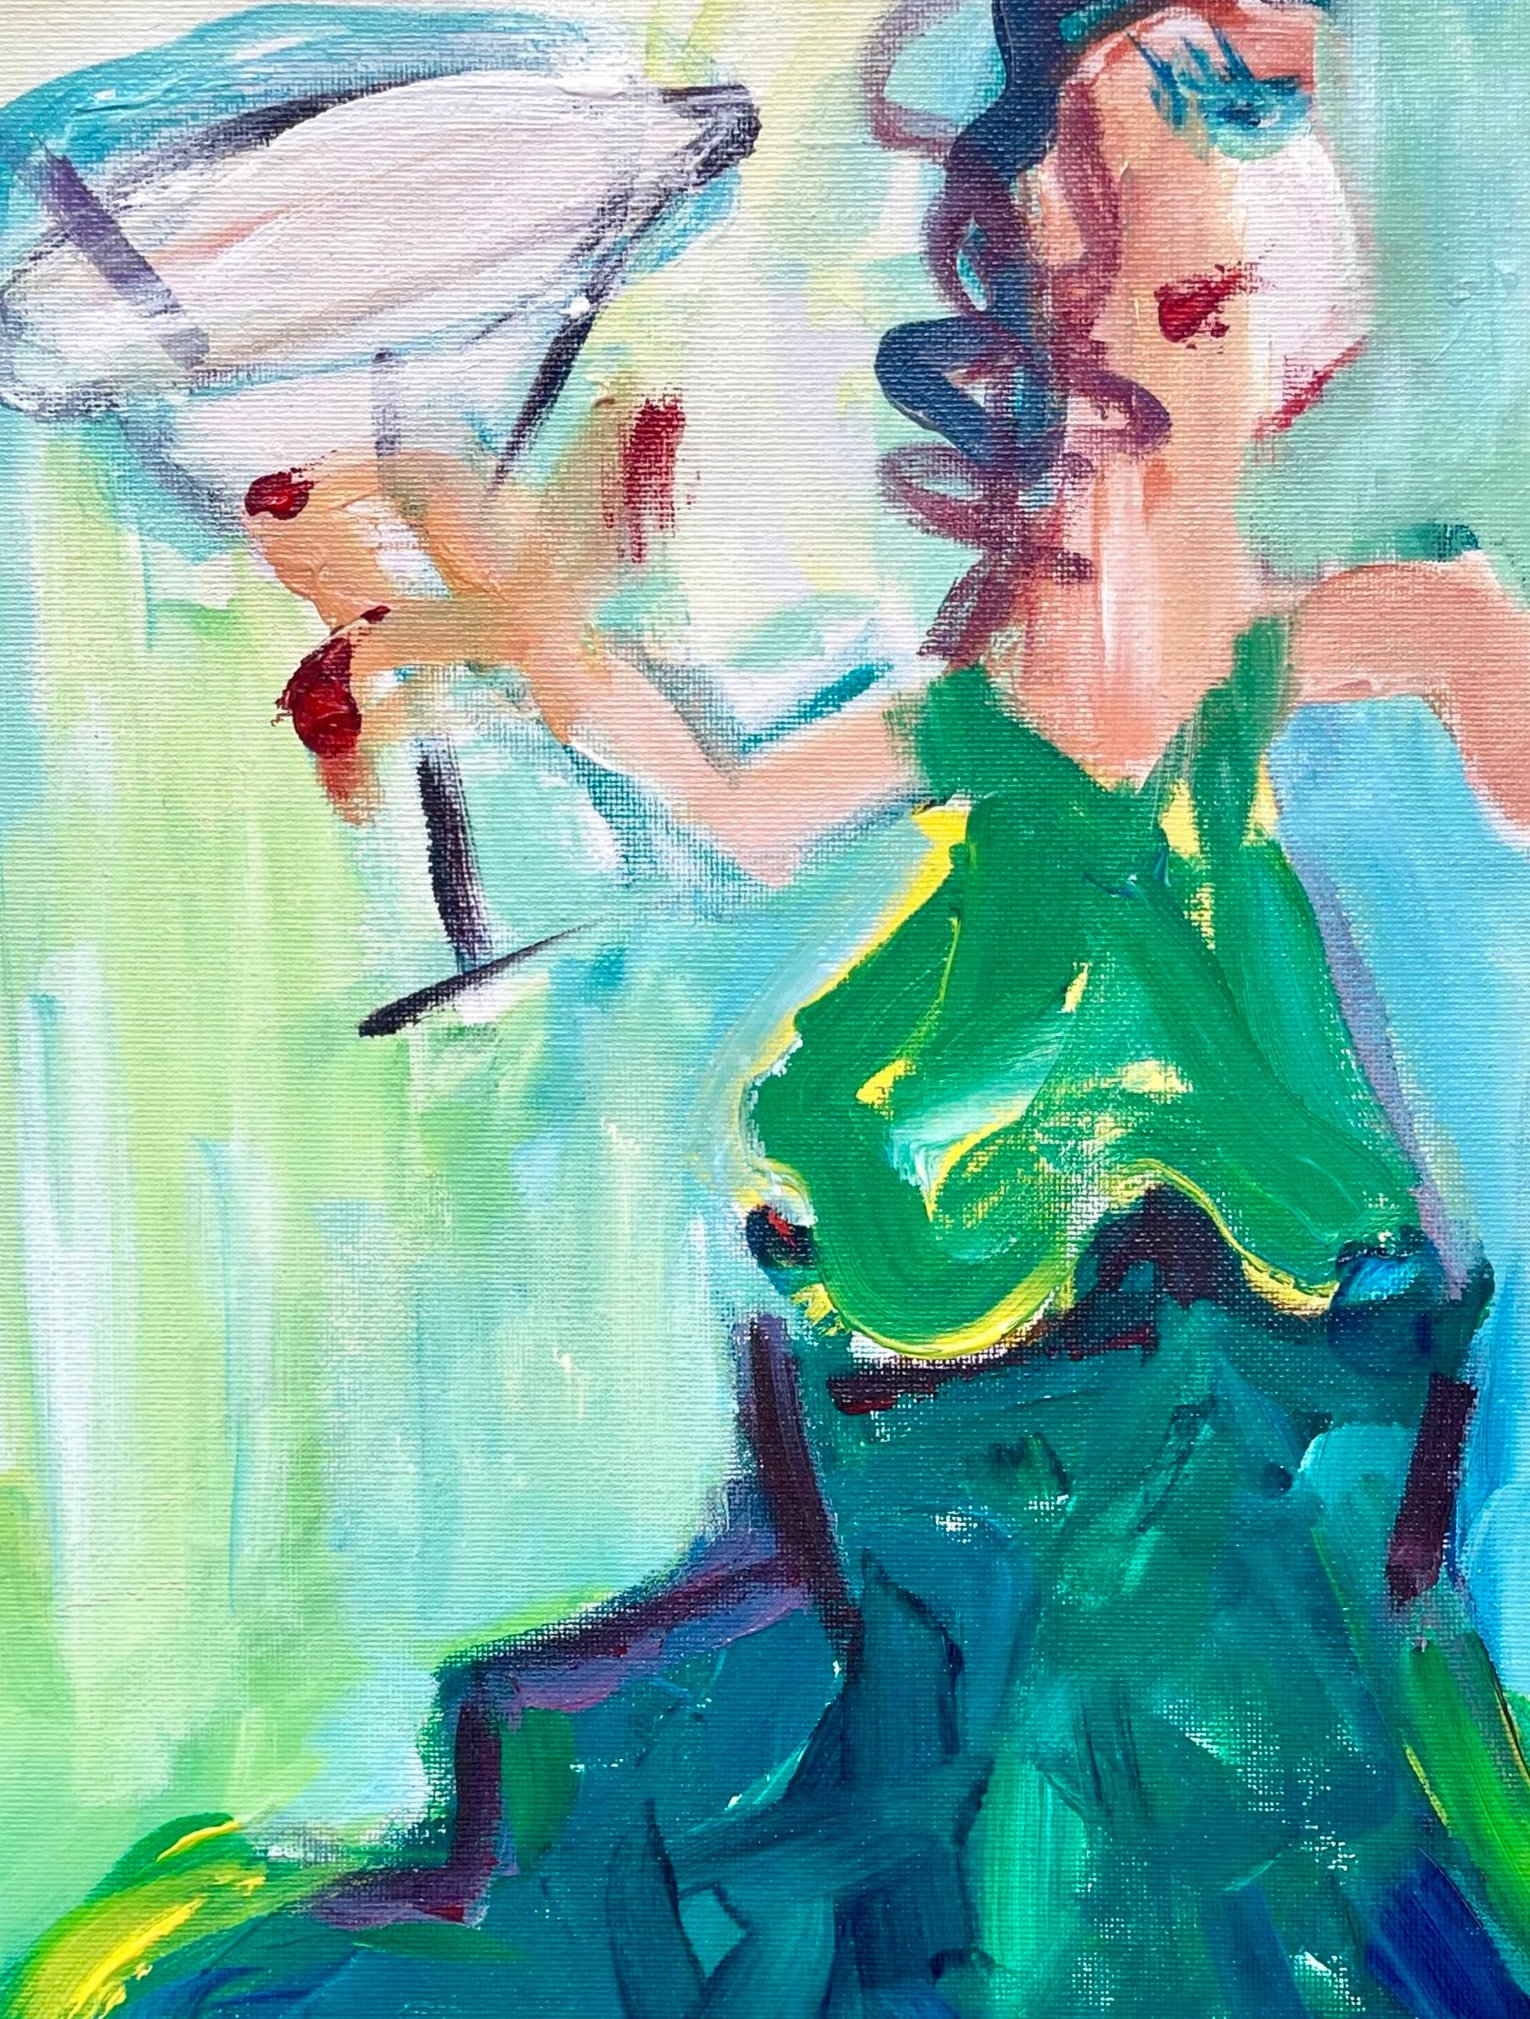 "Dirty Martini" SOLD private collection London, UK